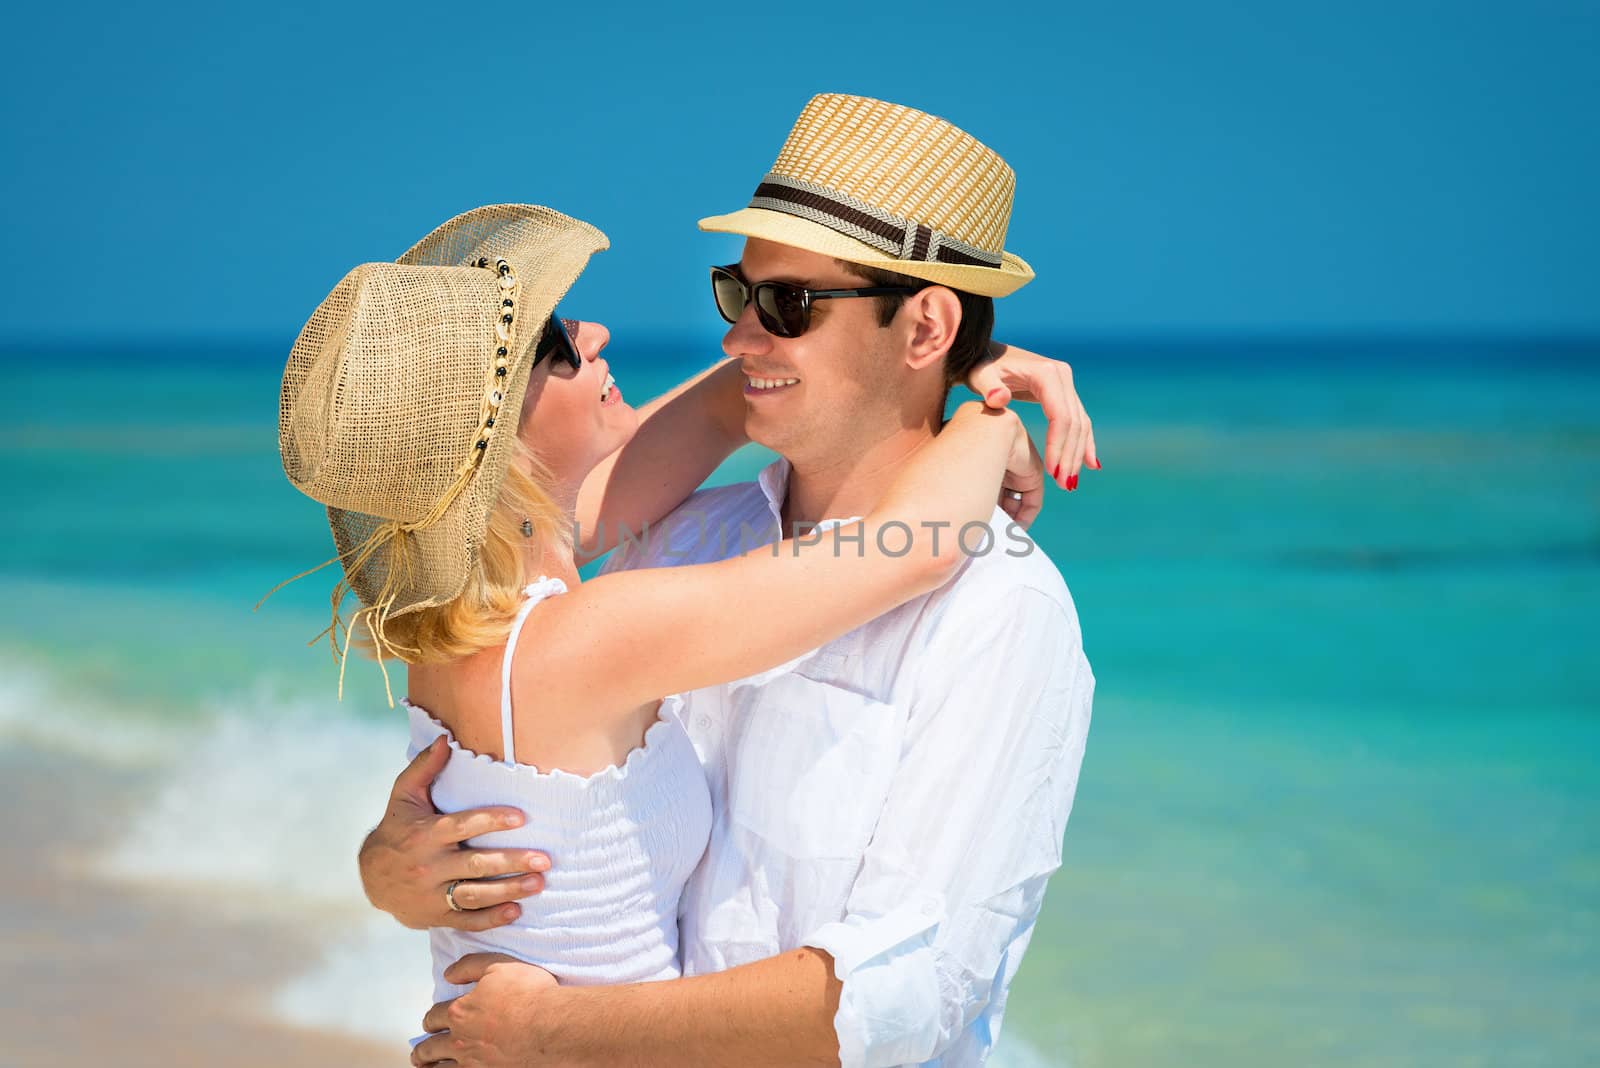 Happy embracing young couple in sunglasses, hats and white dress on a tropical beach with blue sea on background